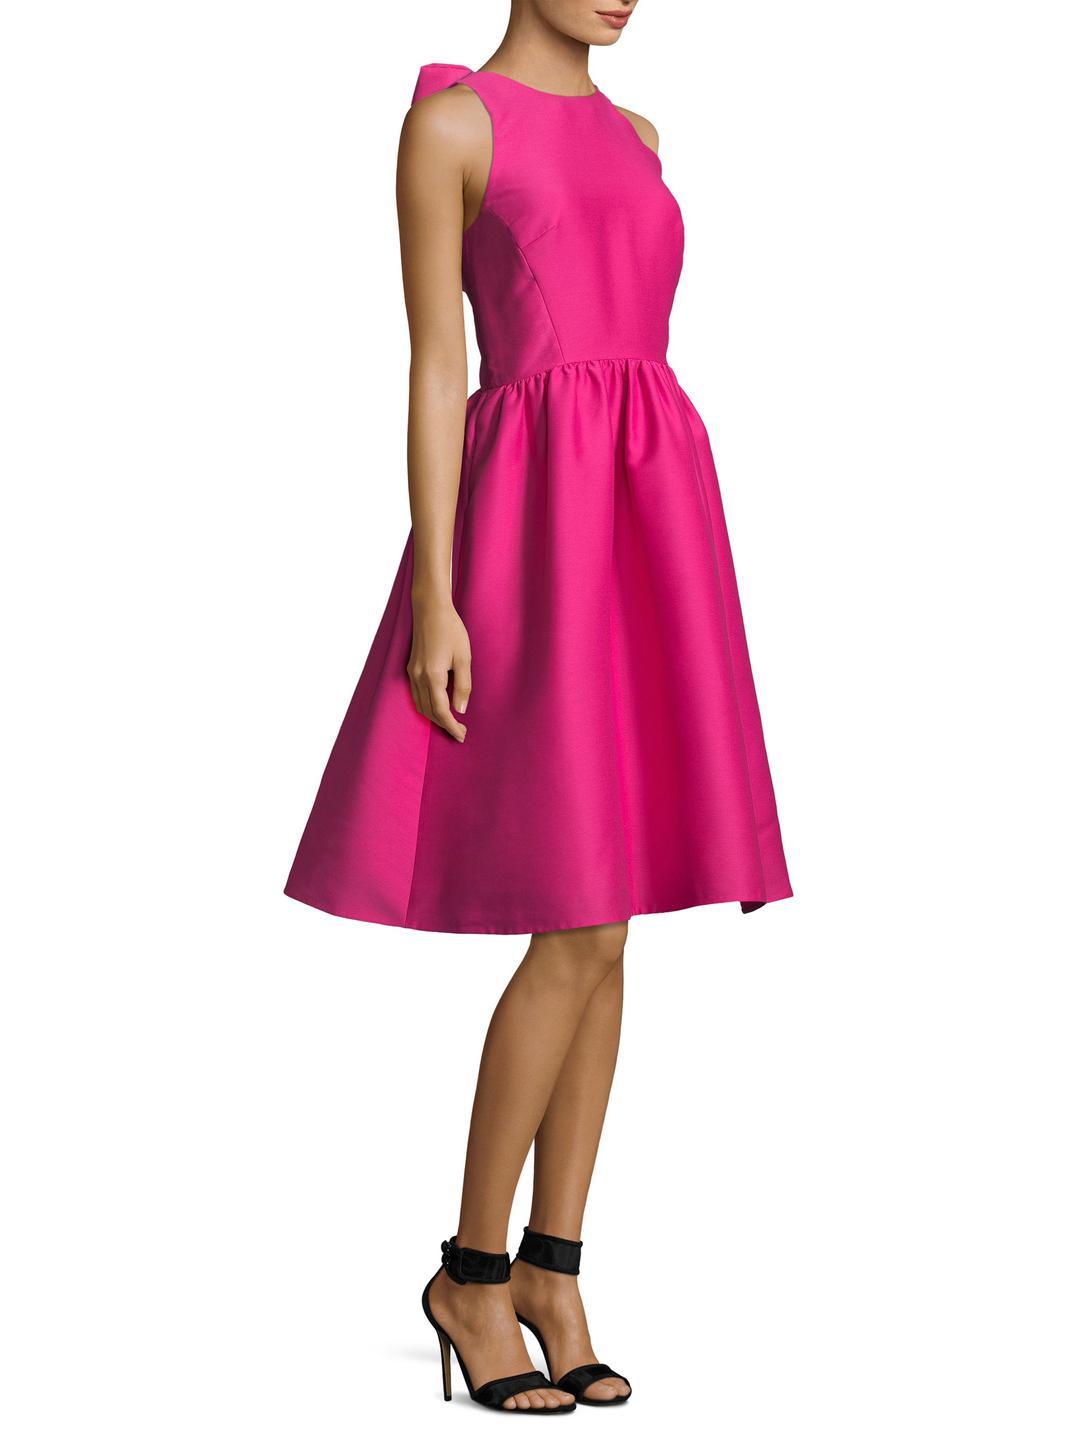 Kate Spade Bow Back Fit And Flare Dress in Pink